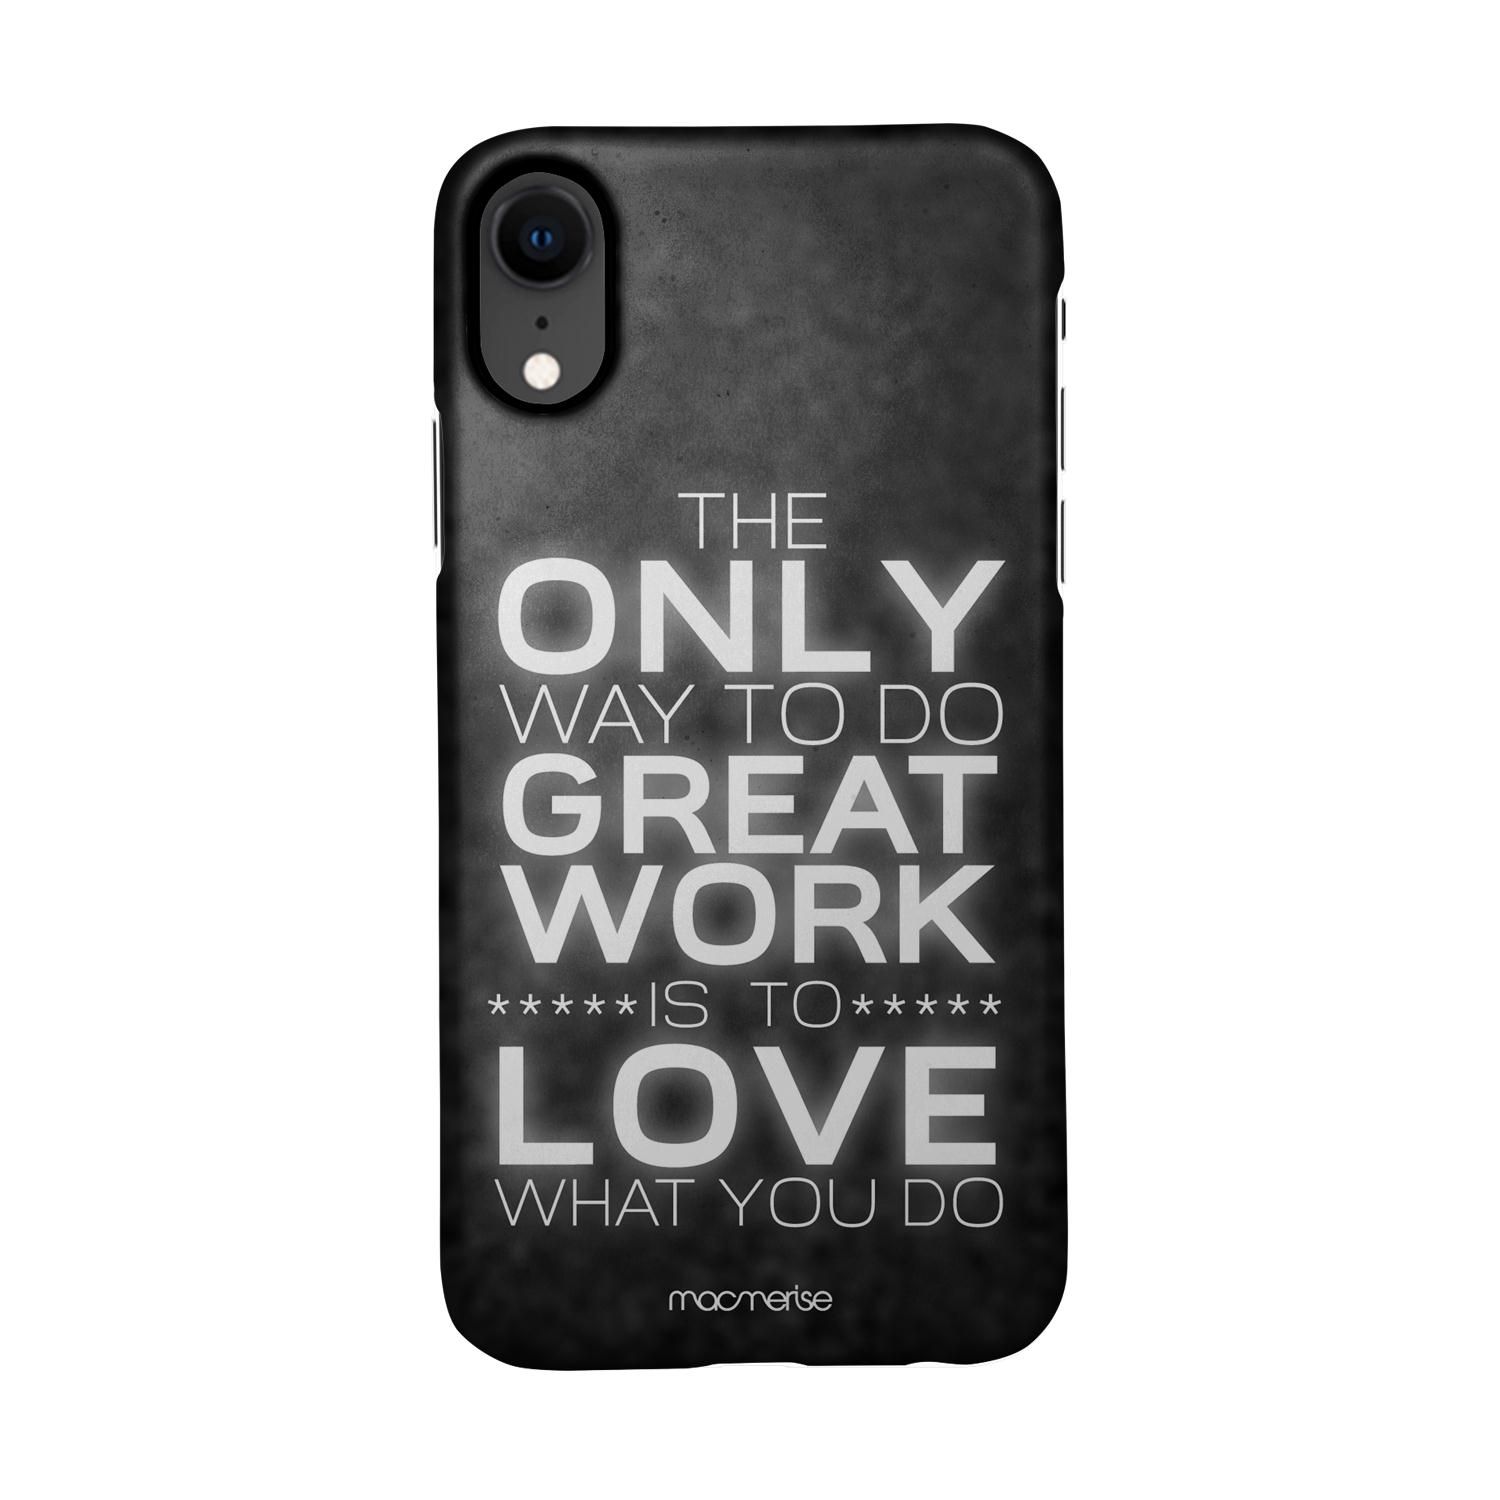 Buy Love What You Do - Sleek Phone Case for iPhone XR Online